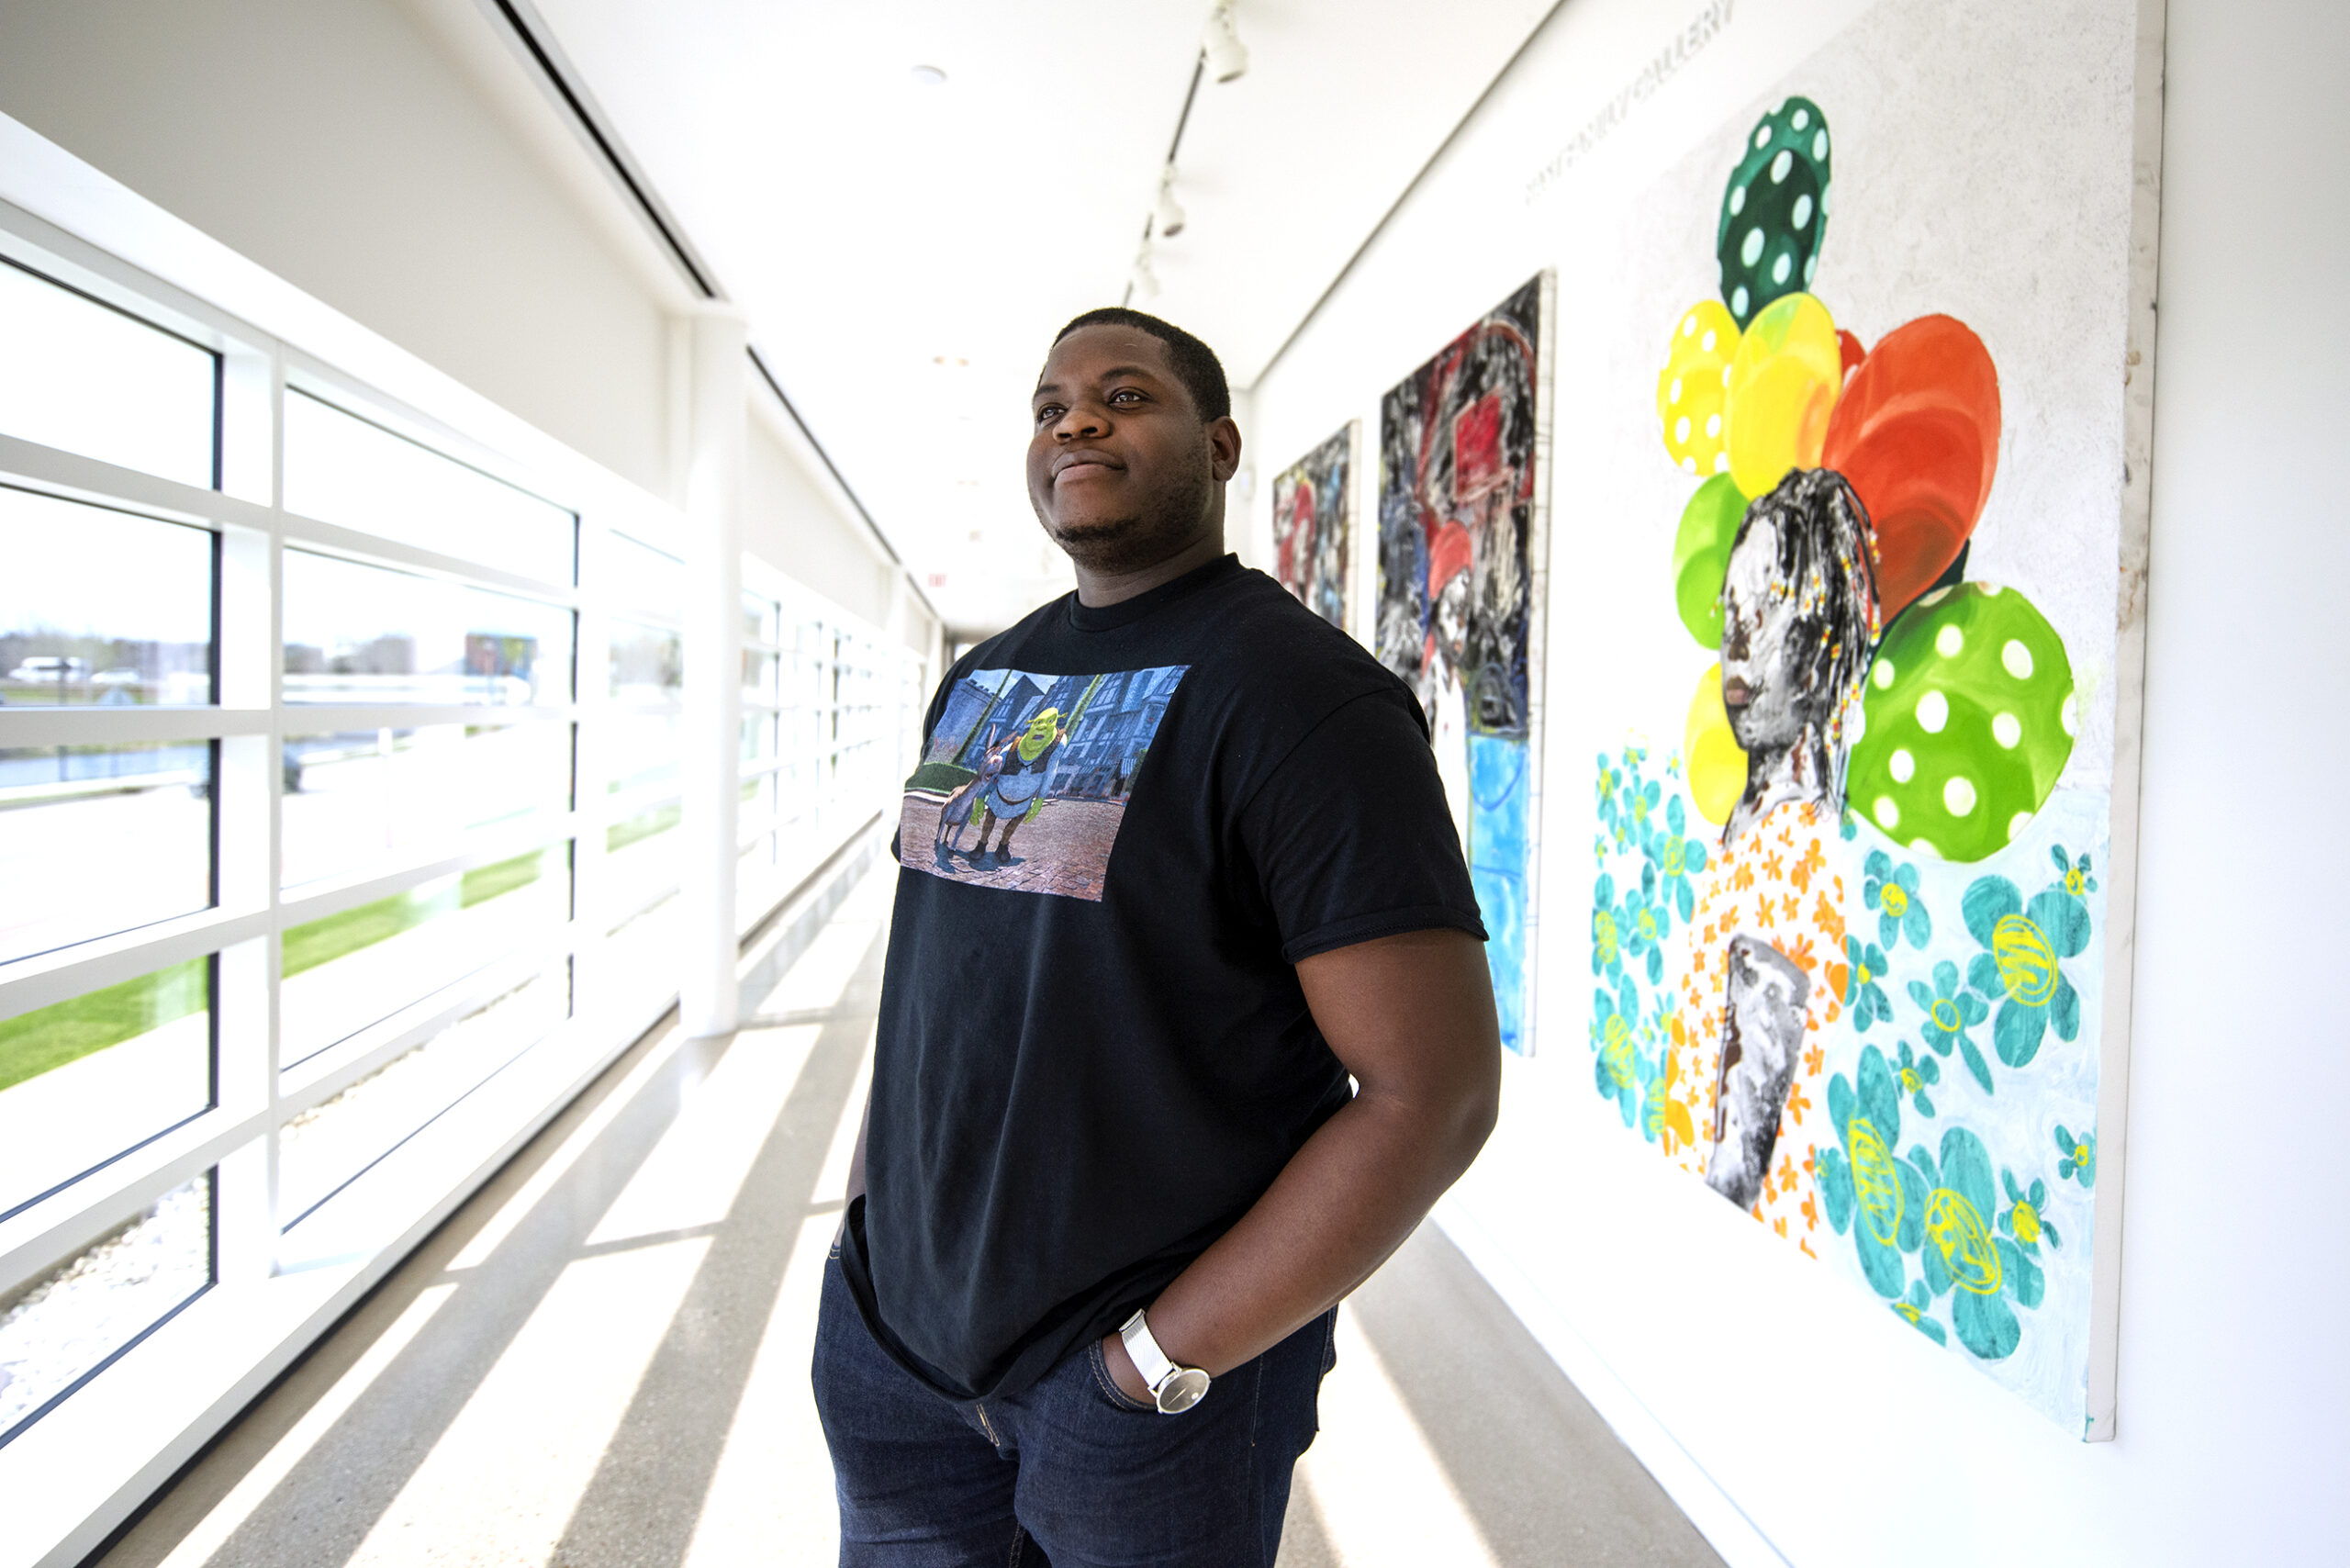 Khari Turner stands in a hallway with windows and colorful artwork displayed on the wall behind him.